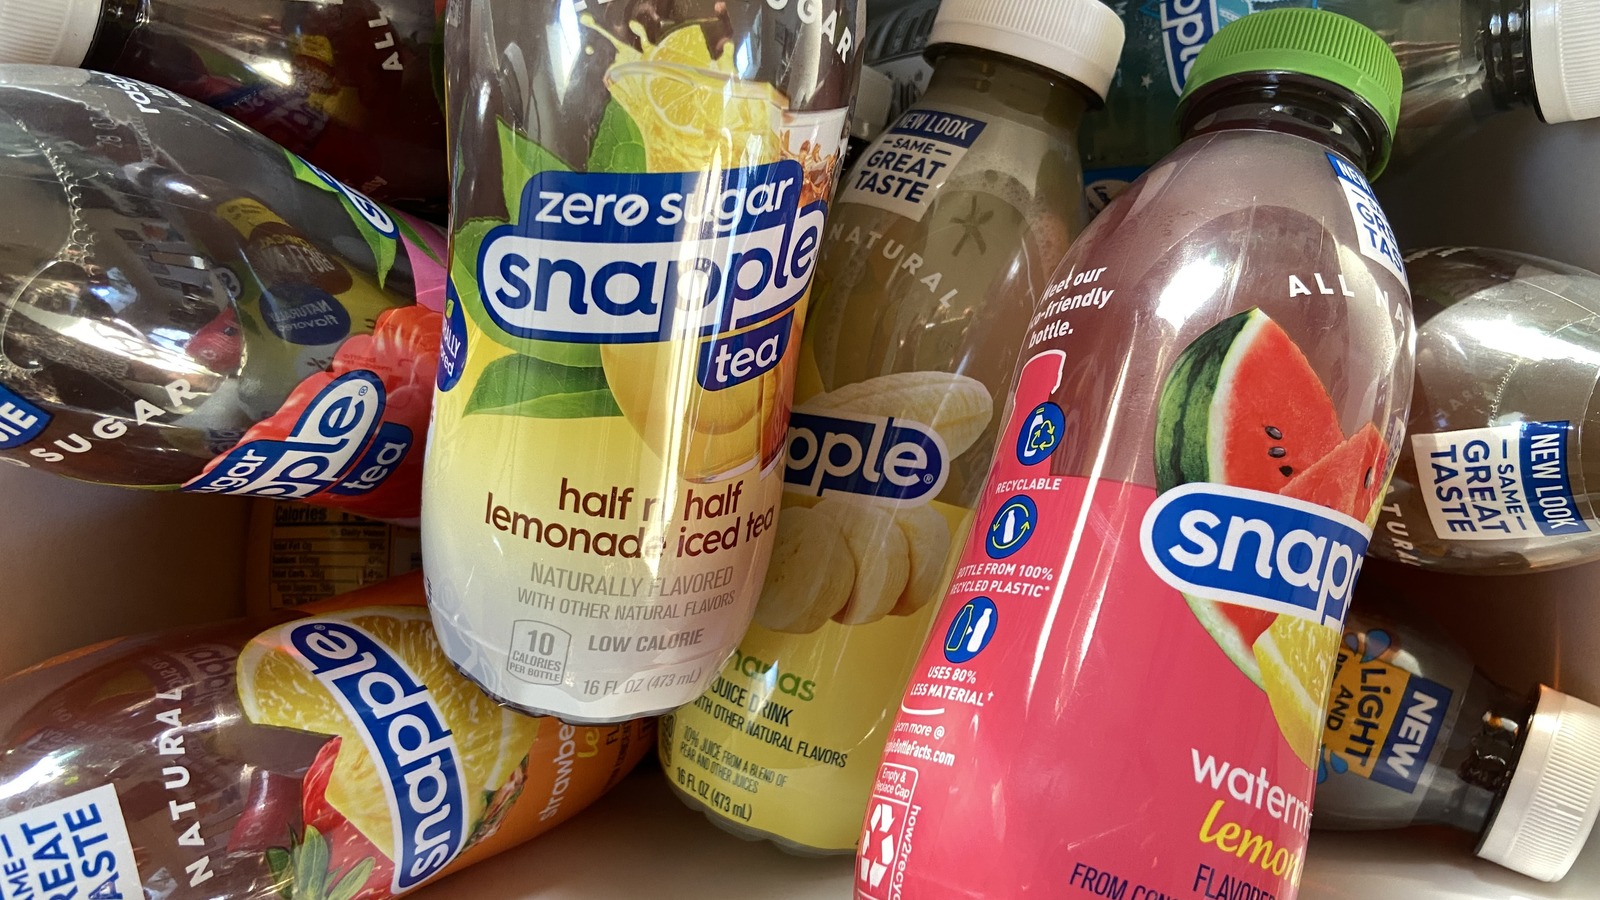 https://www.tastingtable.com/img/gallery/ranking-20-snapple-flavors-from-worst-to-best/l-intro-1651513406.jpg